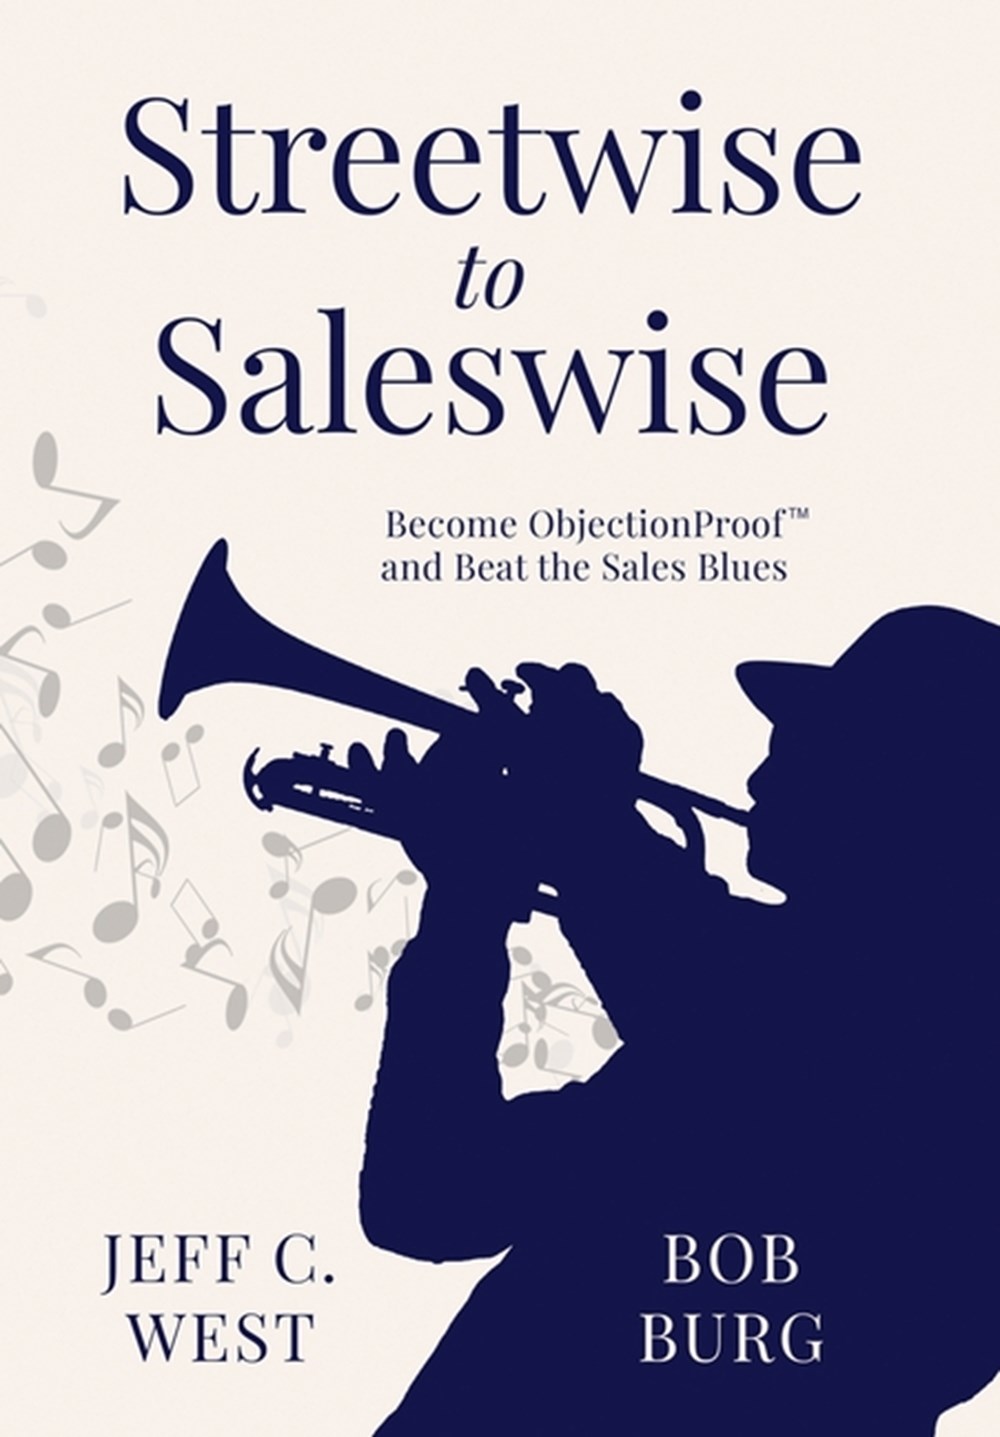 Streetwise to Saleswise: Become ObjectionProof(TM) and Beat the Sales Blues: Become ObjectionProof(T